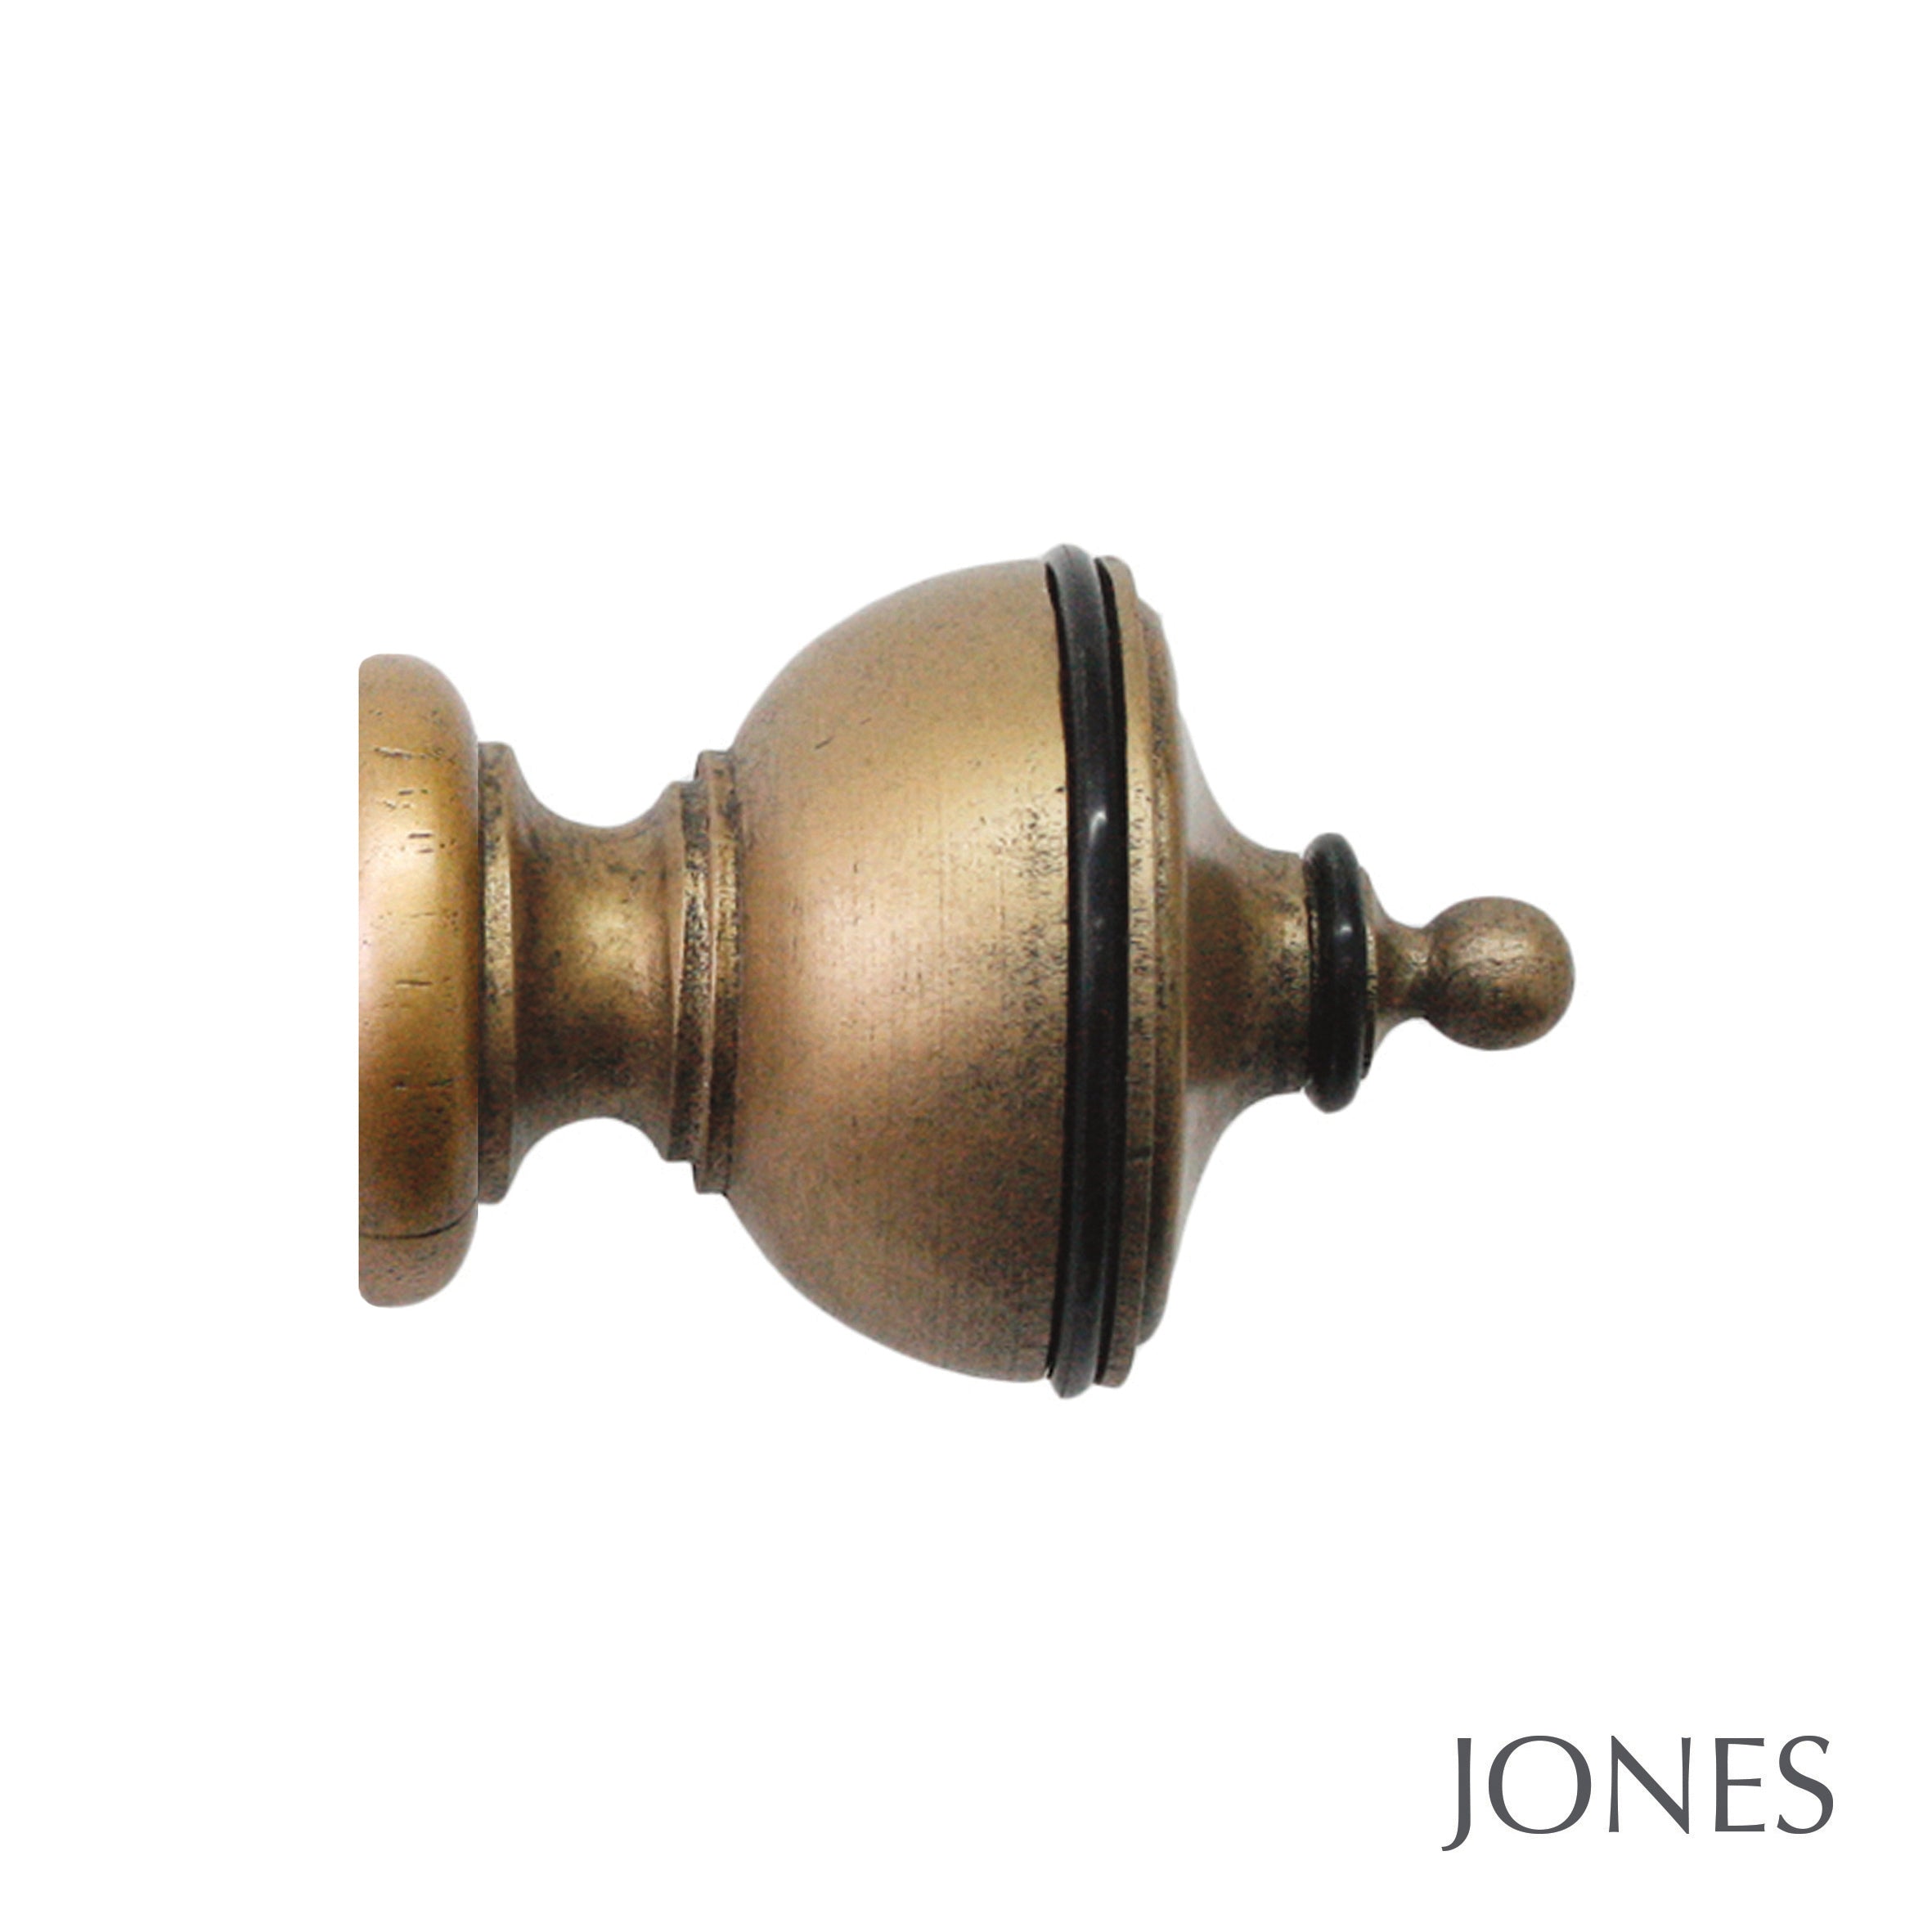 Jones Interiors Cathedral Exeter Finial Curtain Pole Set in Antique Gold